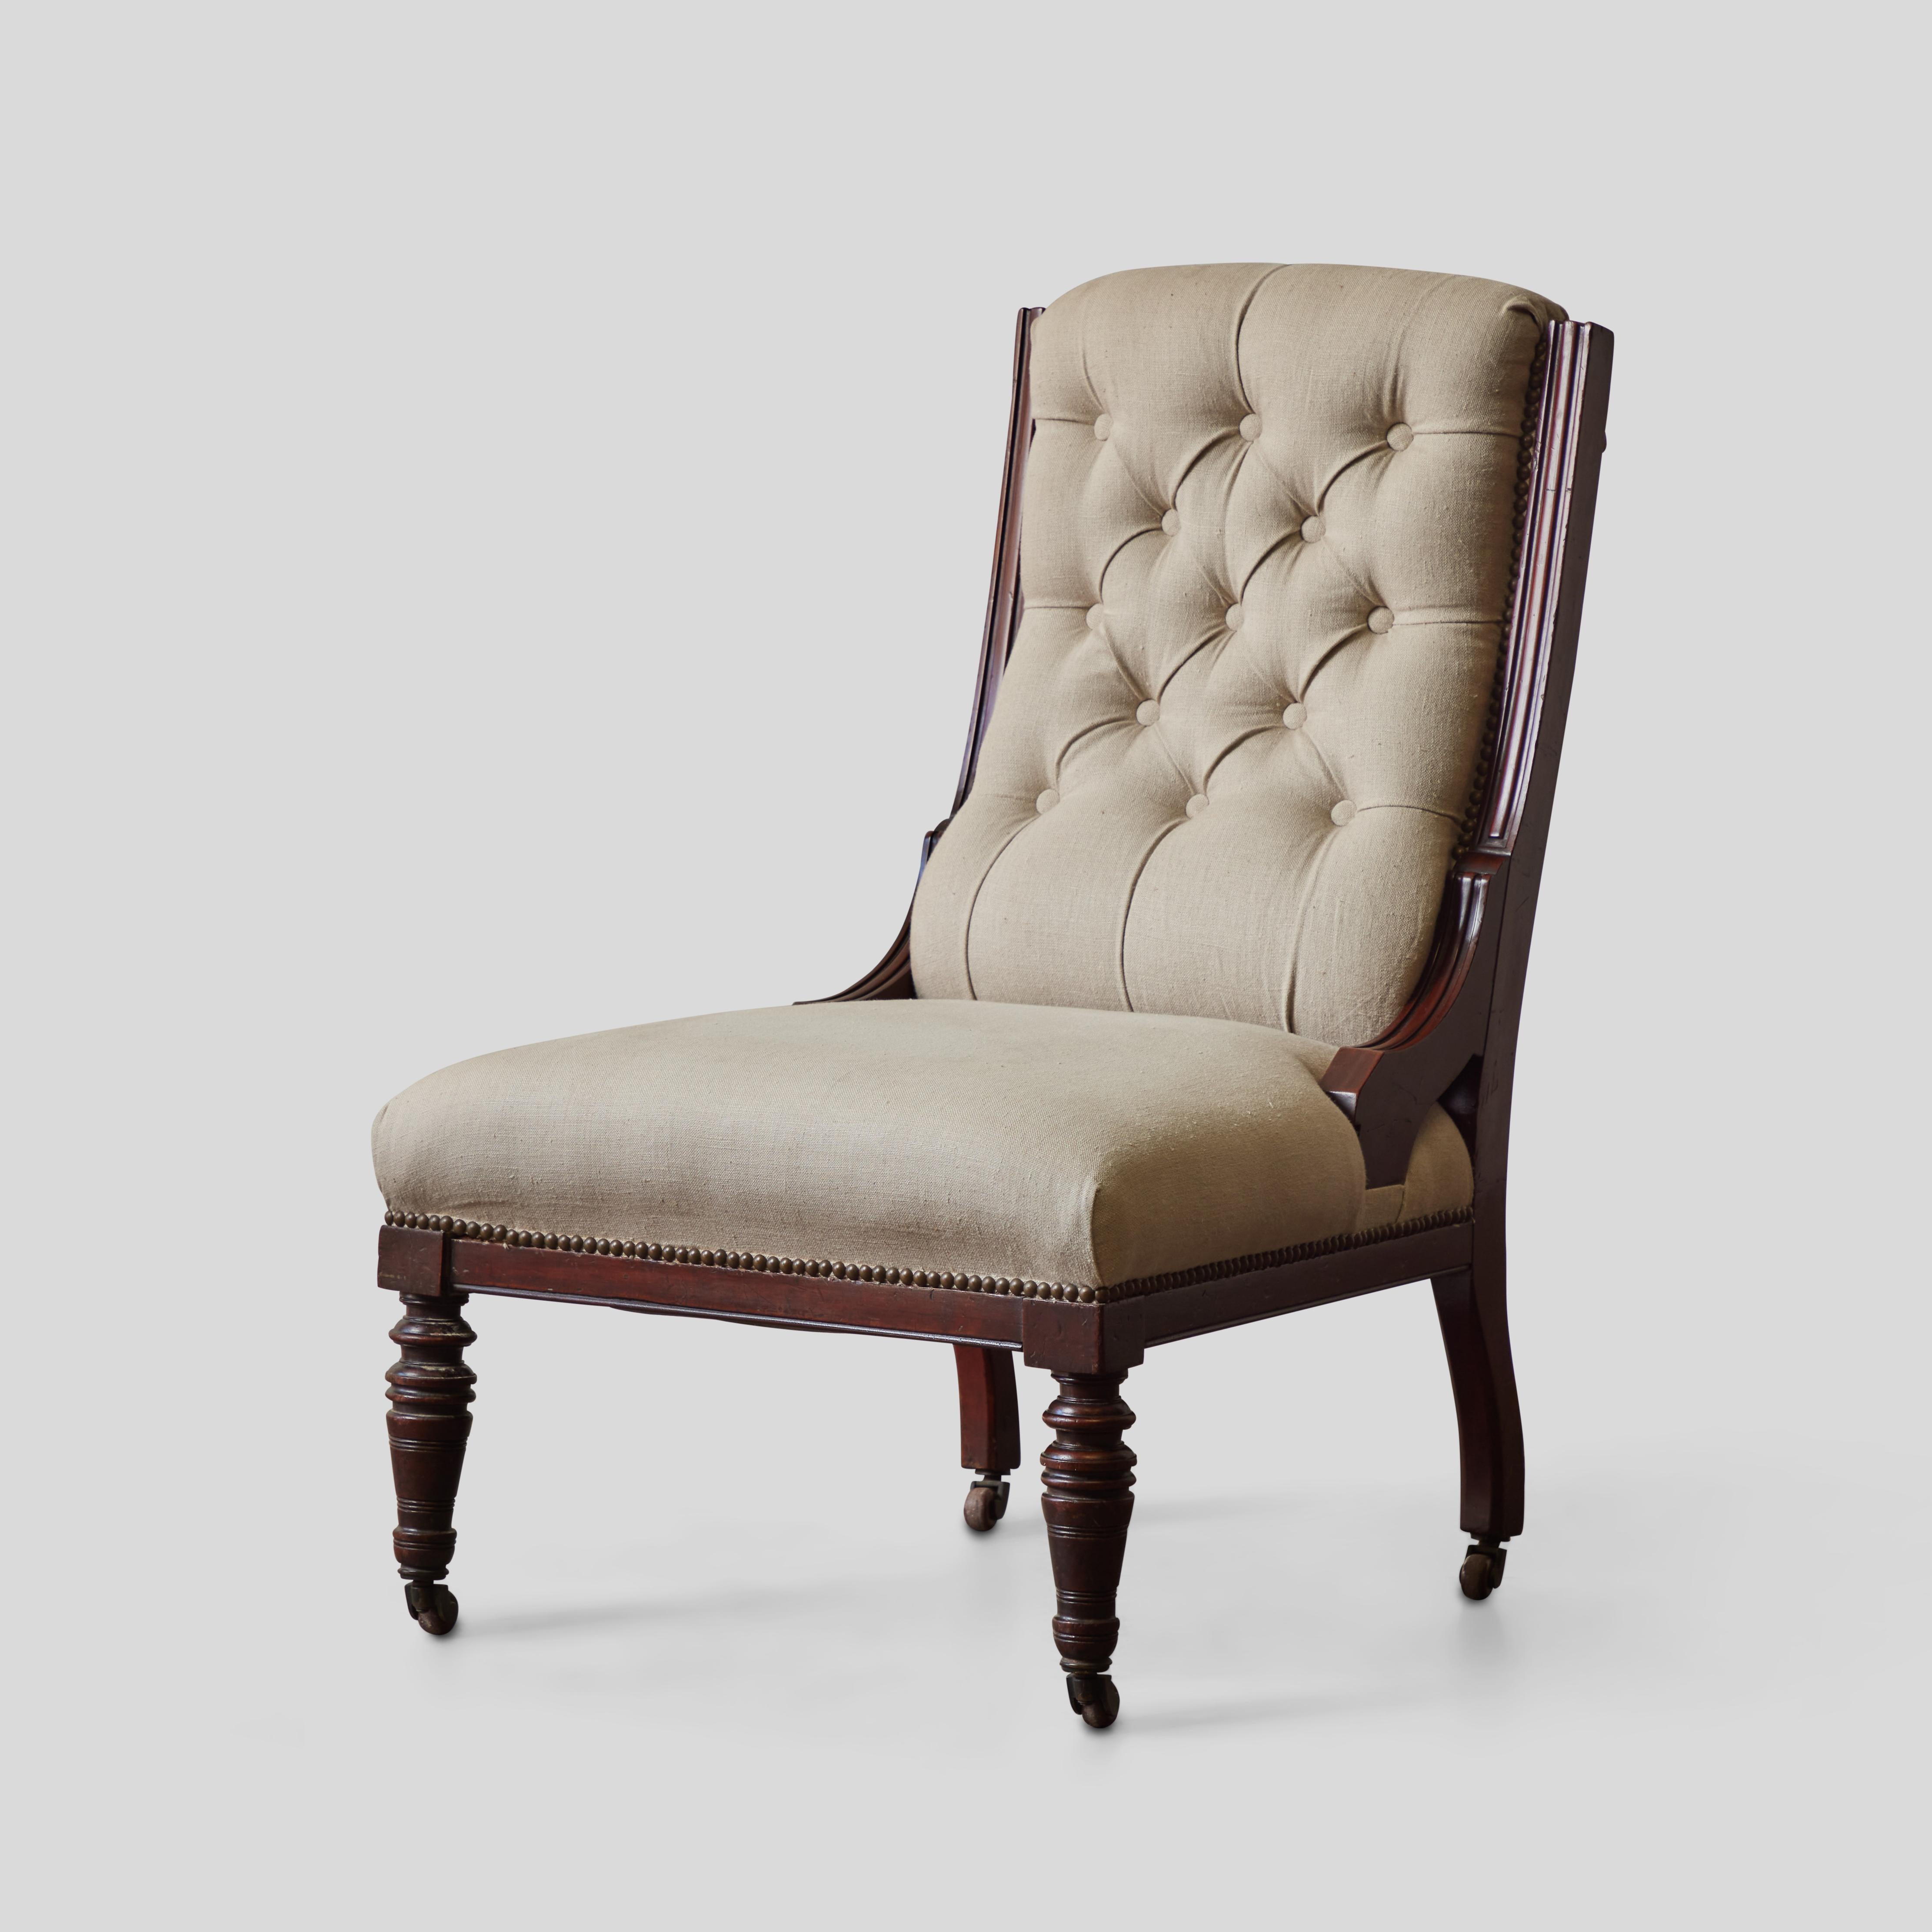 19th century English slipper chair. With its simple, Classic lines, carved mahogany framework and contemporary cream colored natural Belgian linen upholstery, the chair is comfortable, elegant Classic.

England, circa 1880

Dimensions: 25W x 29D